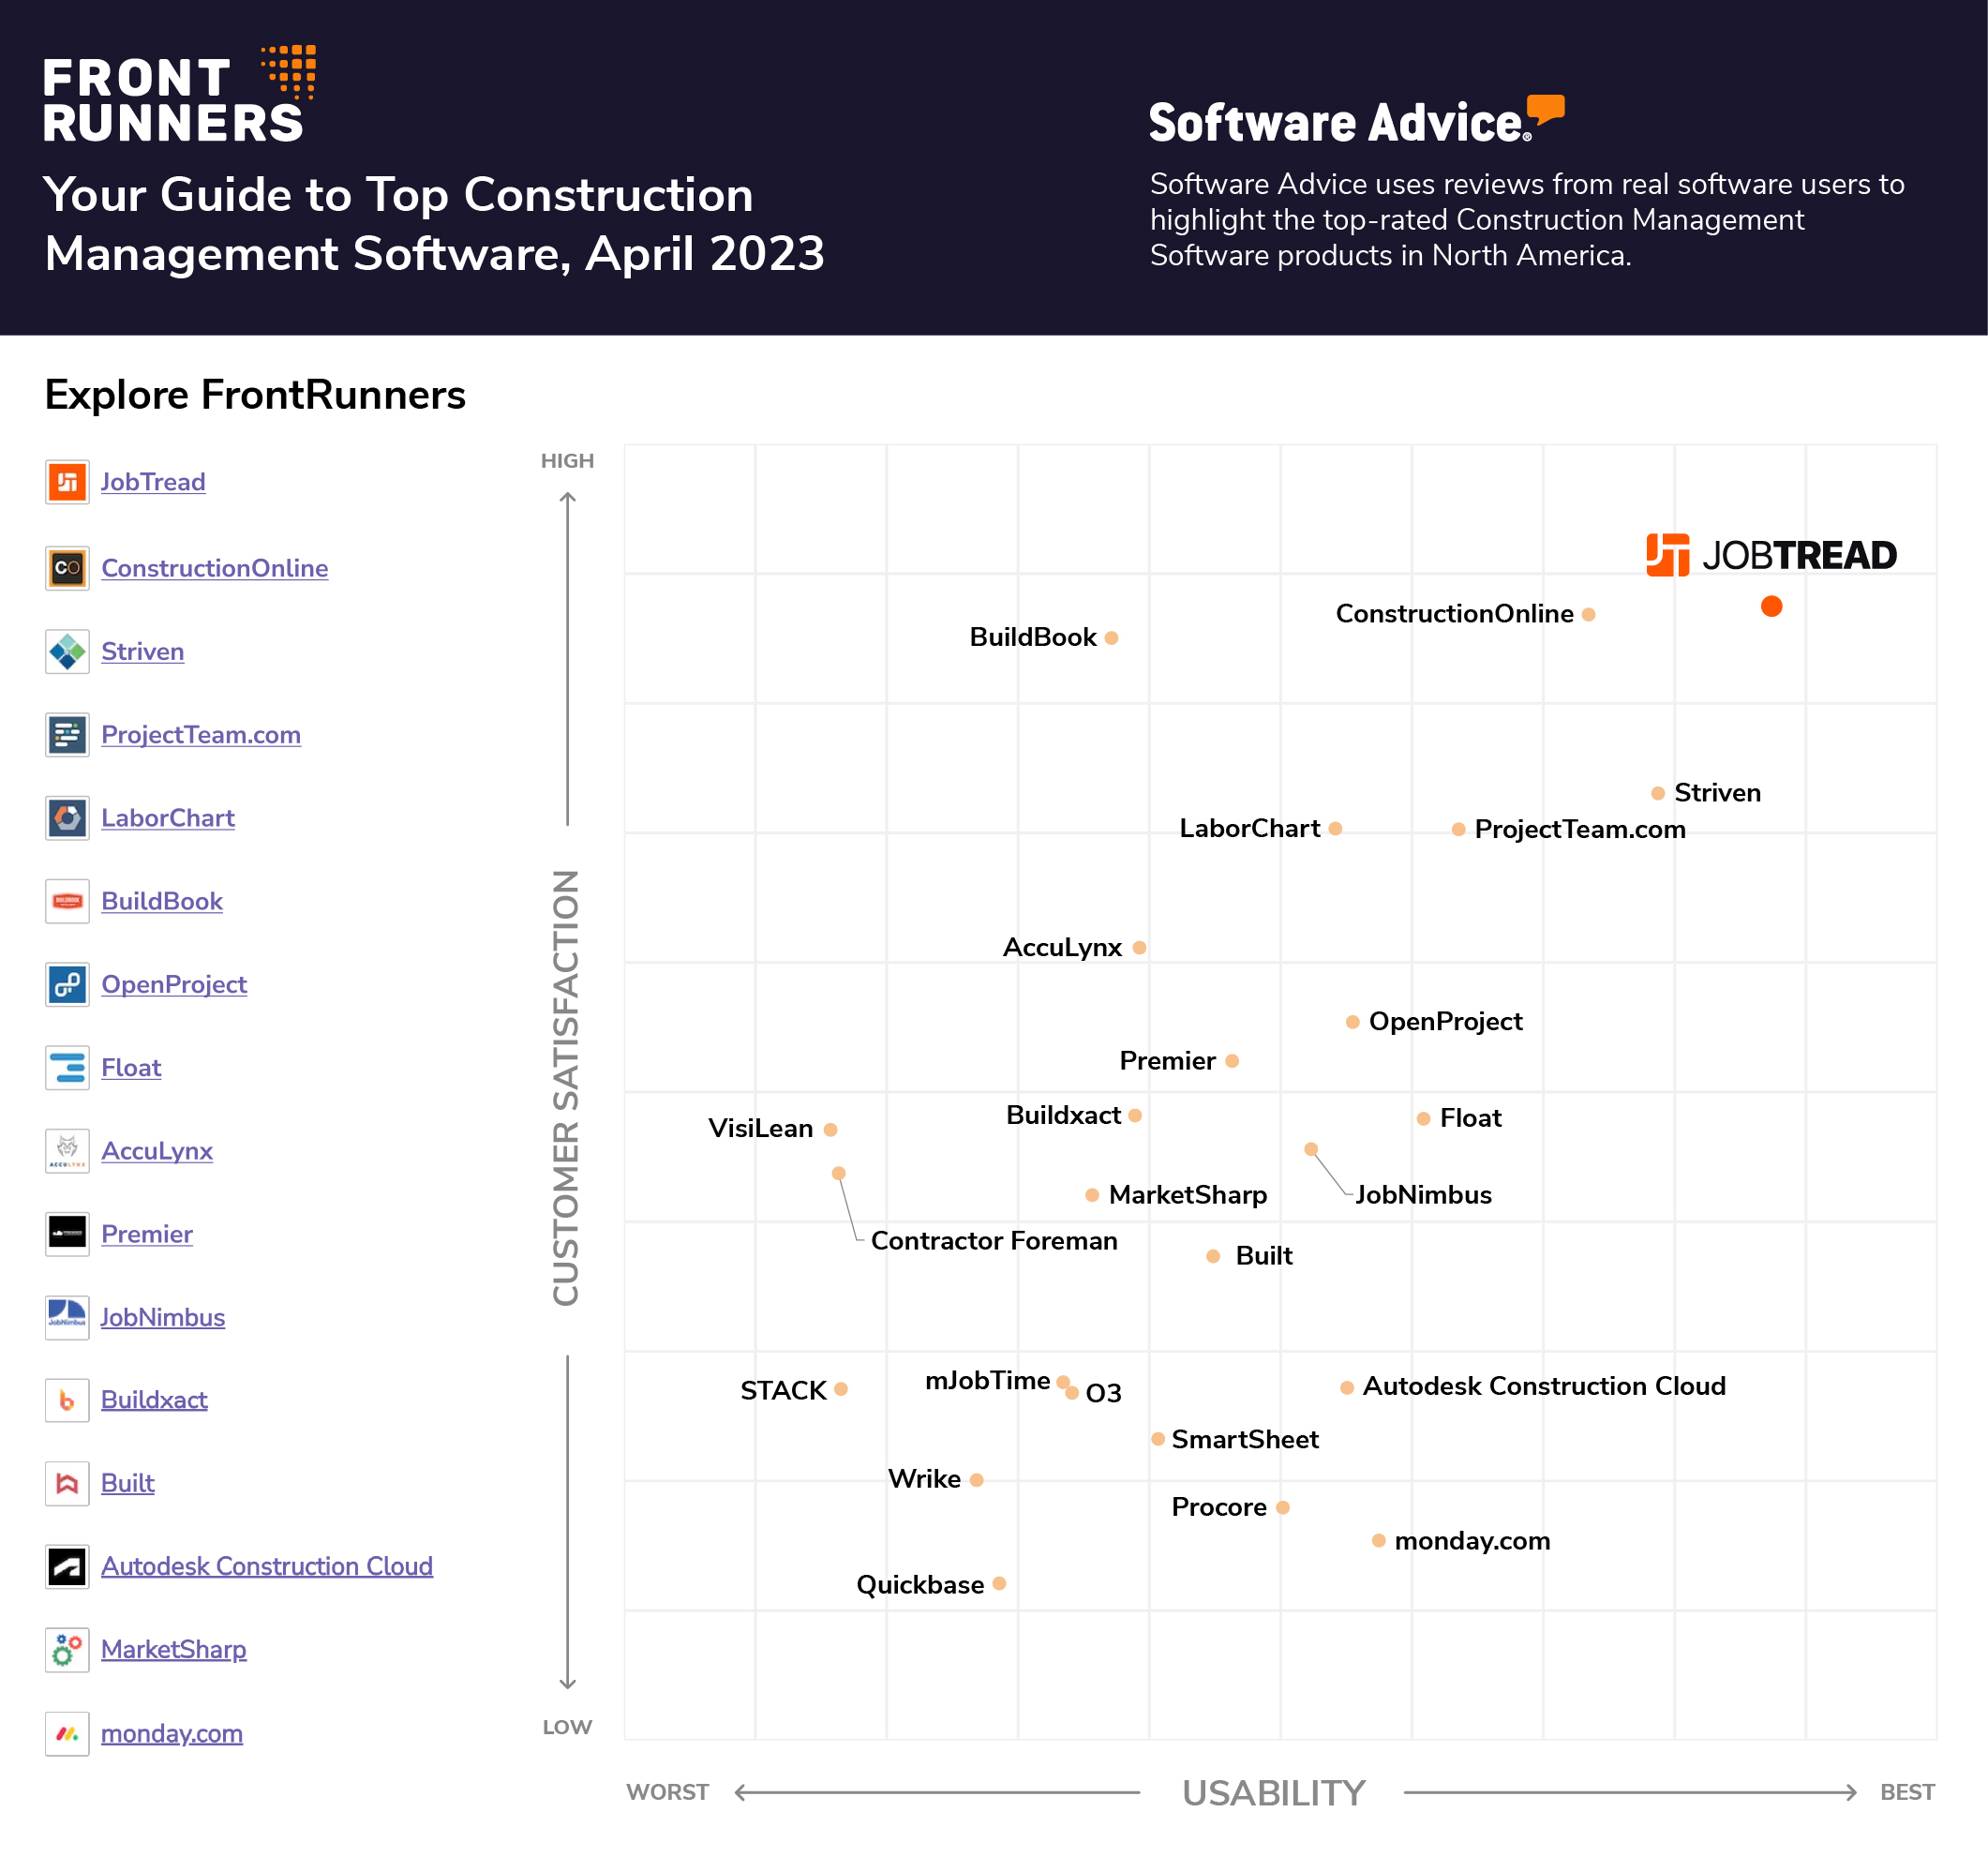 JobTread Recognized in Software Advice’s Top Construction Management Software Category